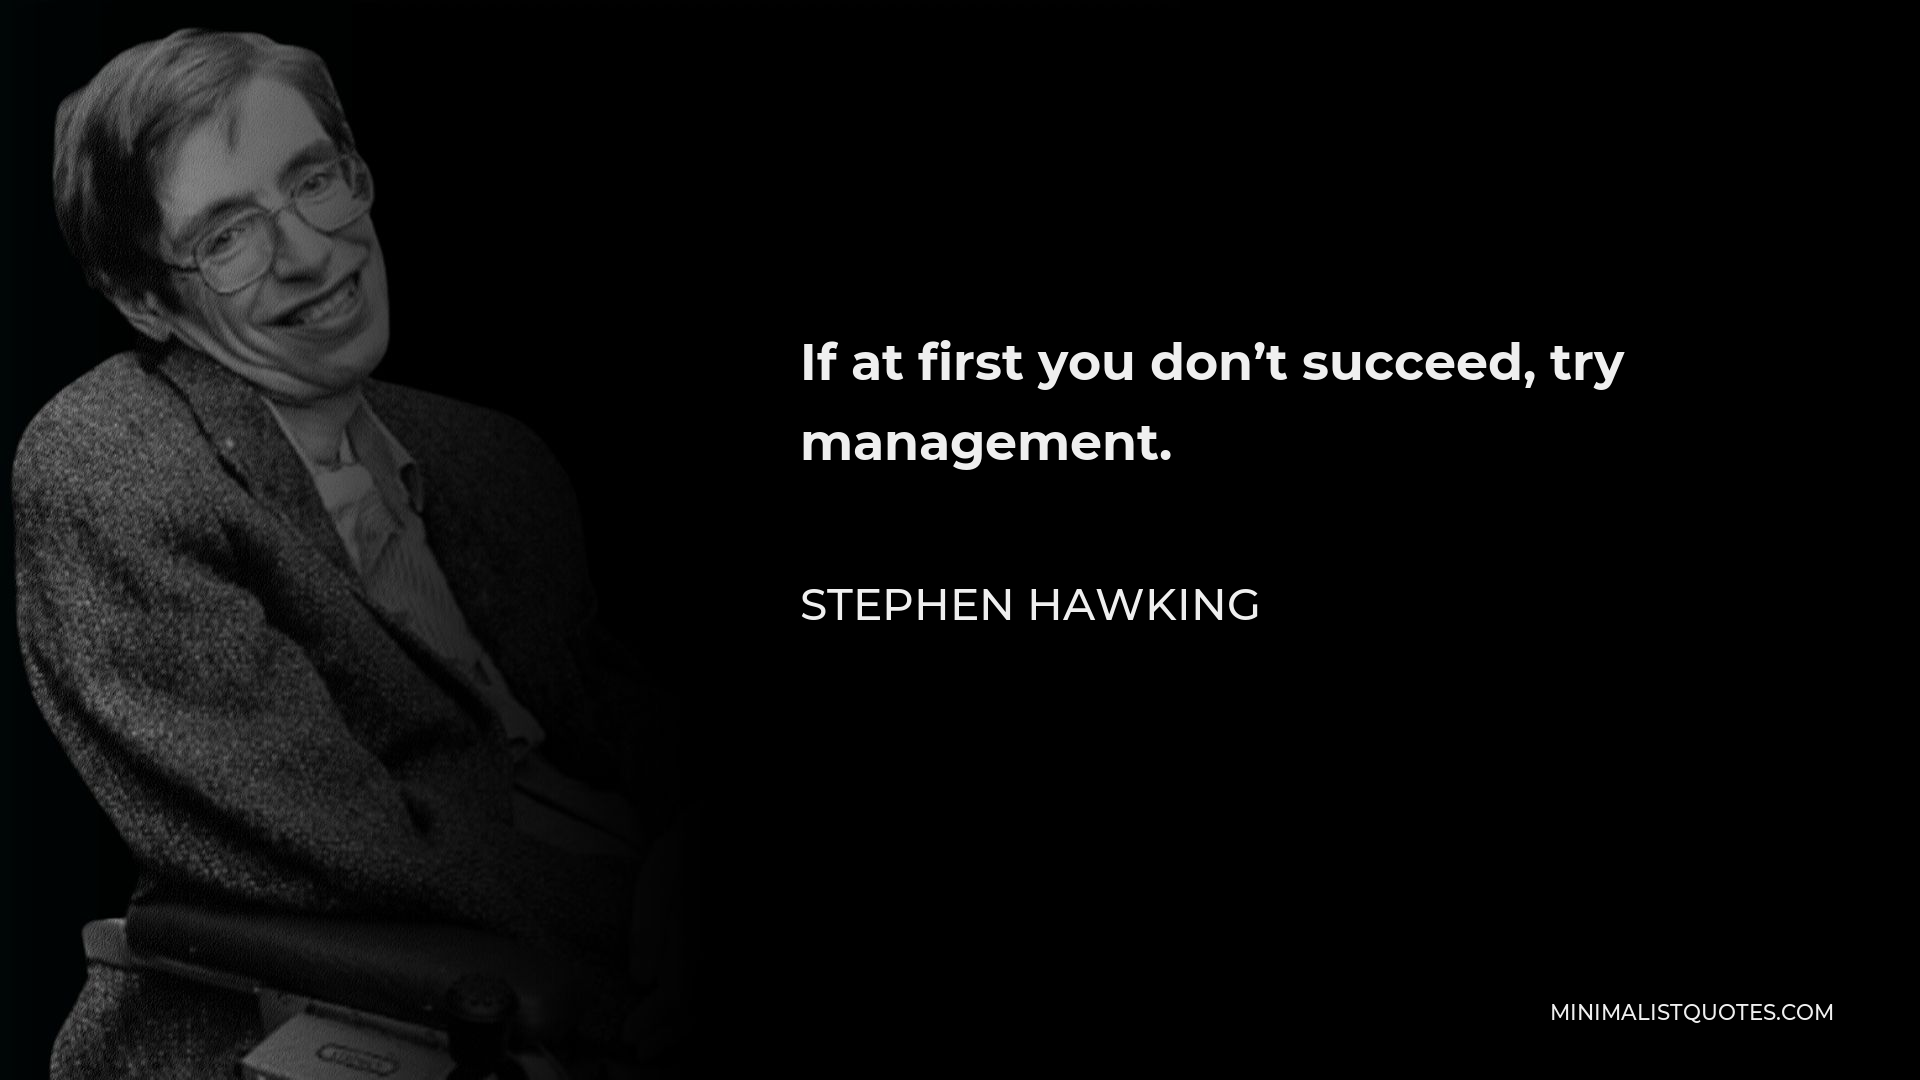 Stephen Hawking Quote - If at first you don’t succeed, try management.